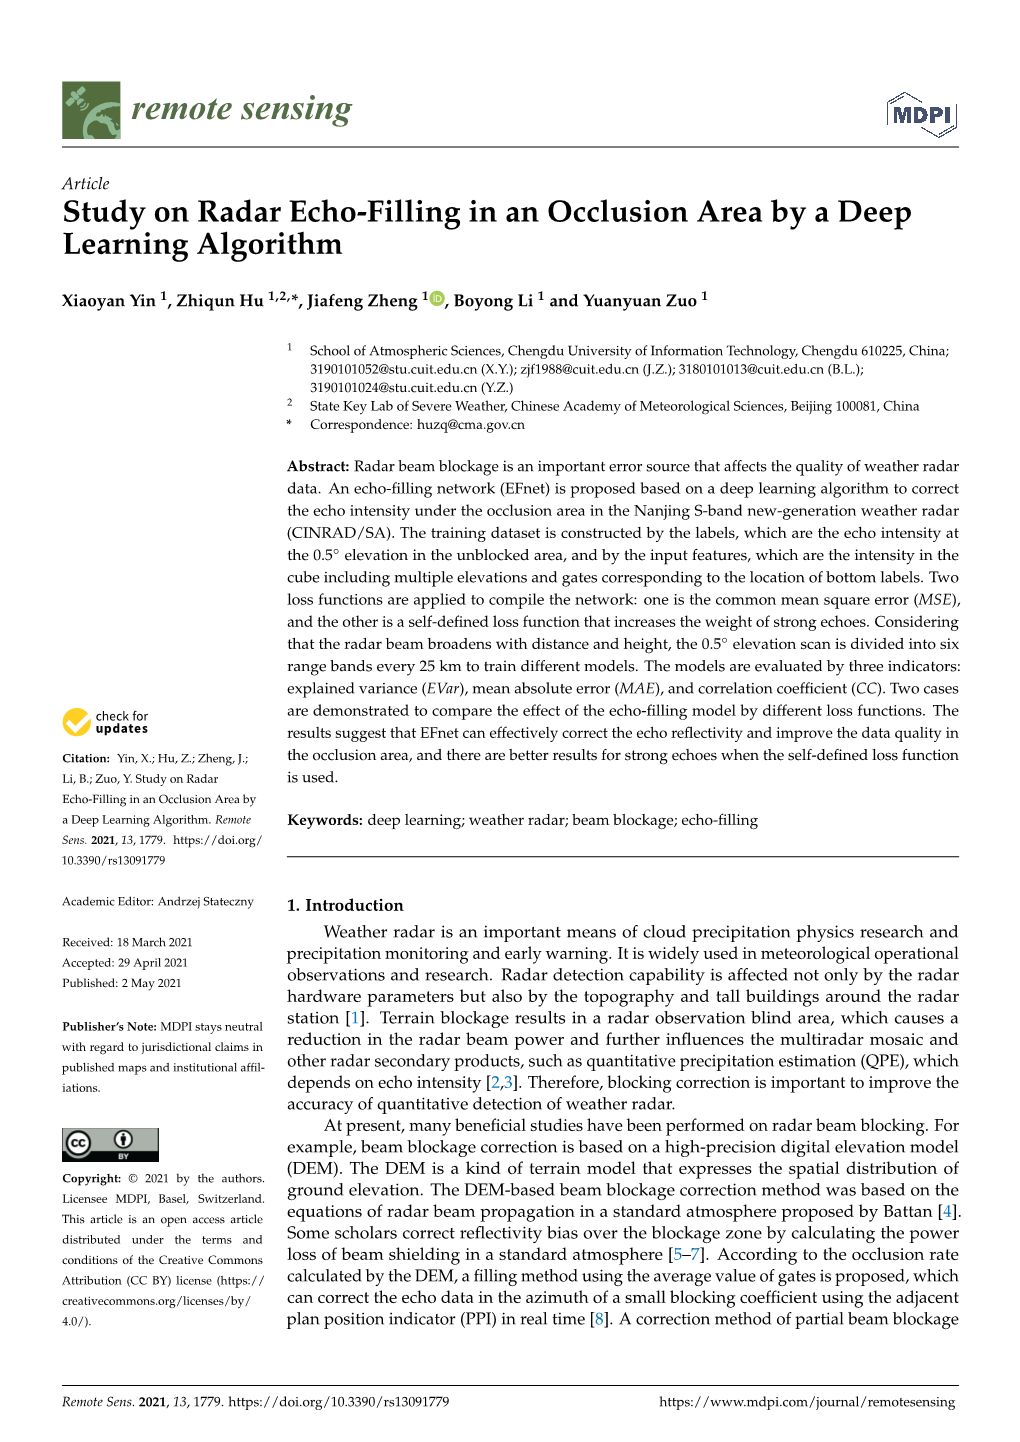 Study on Radar Echo-Filling in an Occlusion Area by a Deep Learning Algorithm